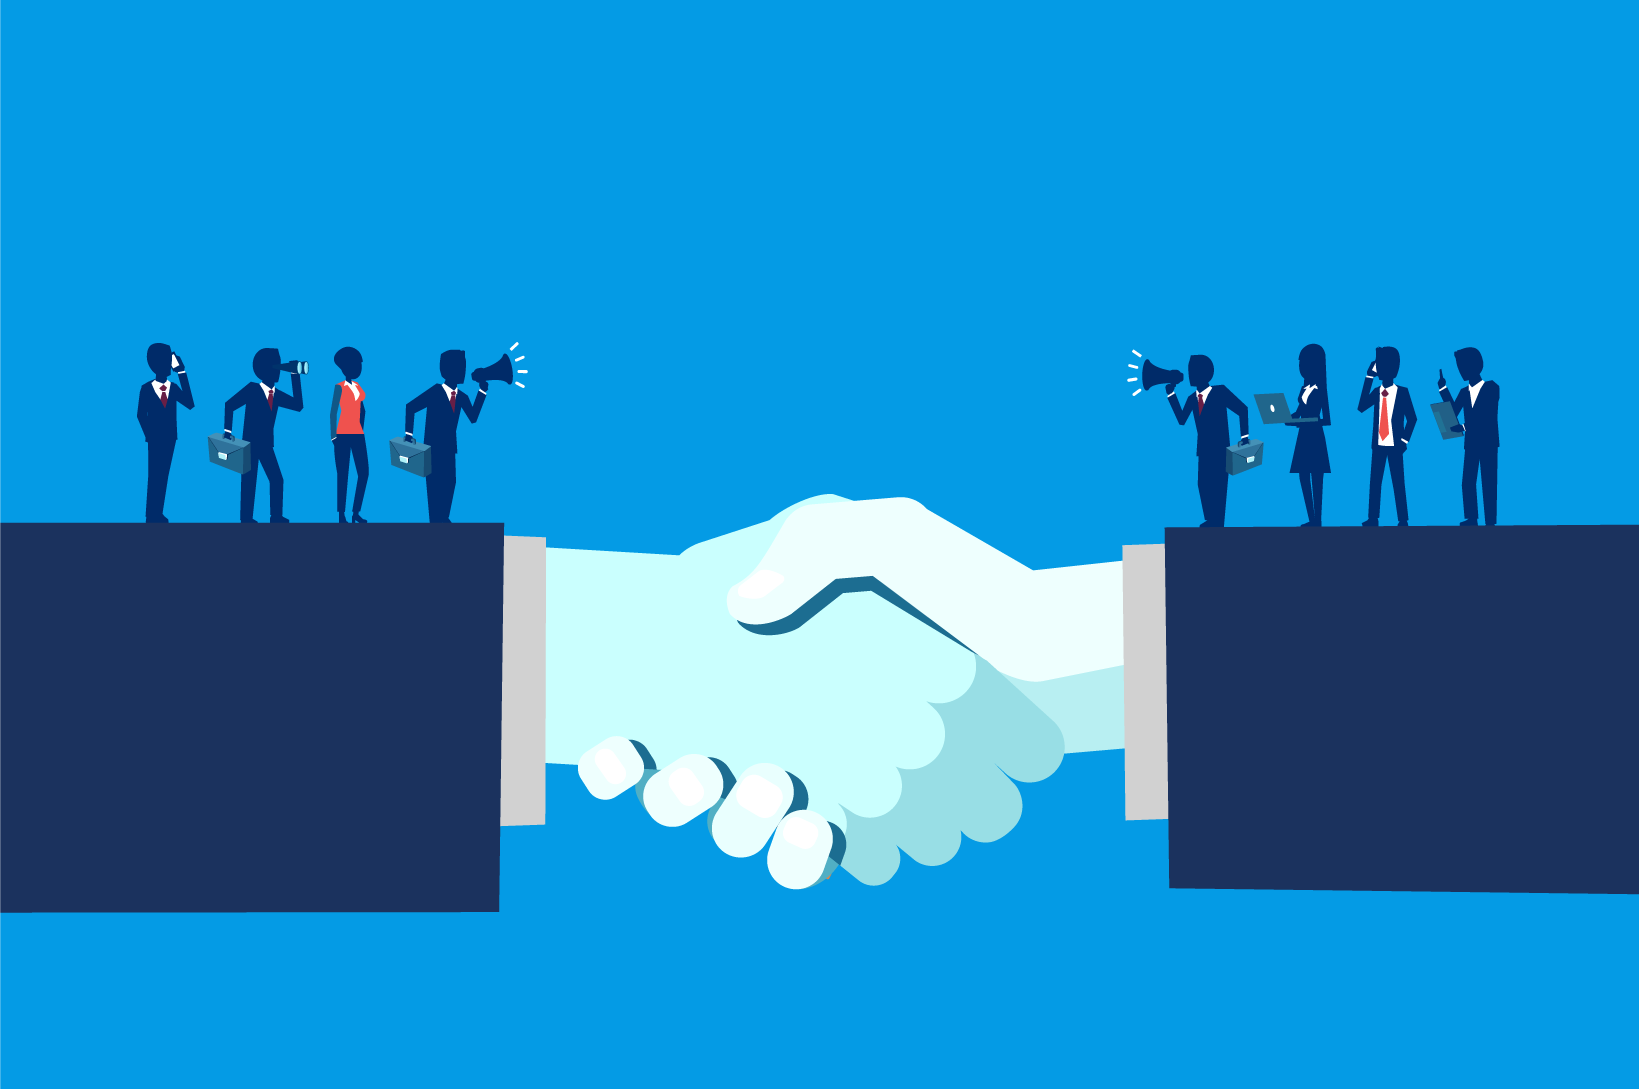 A business handshake graphic, with people on either side of the divide, demonstrates the challenges of successful company mergers